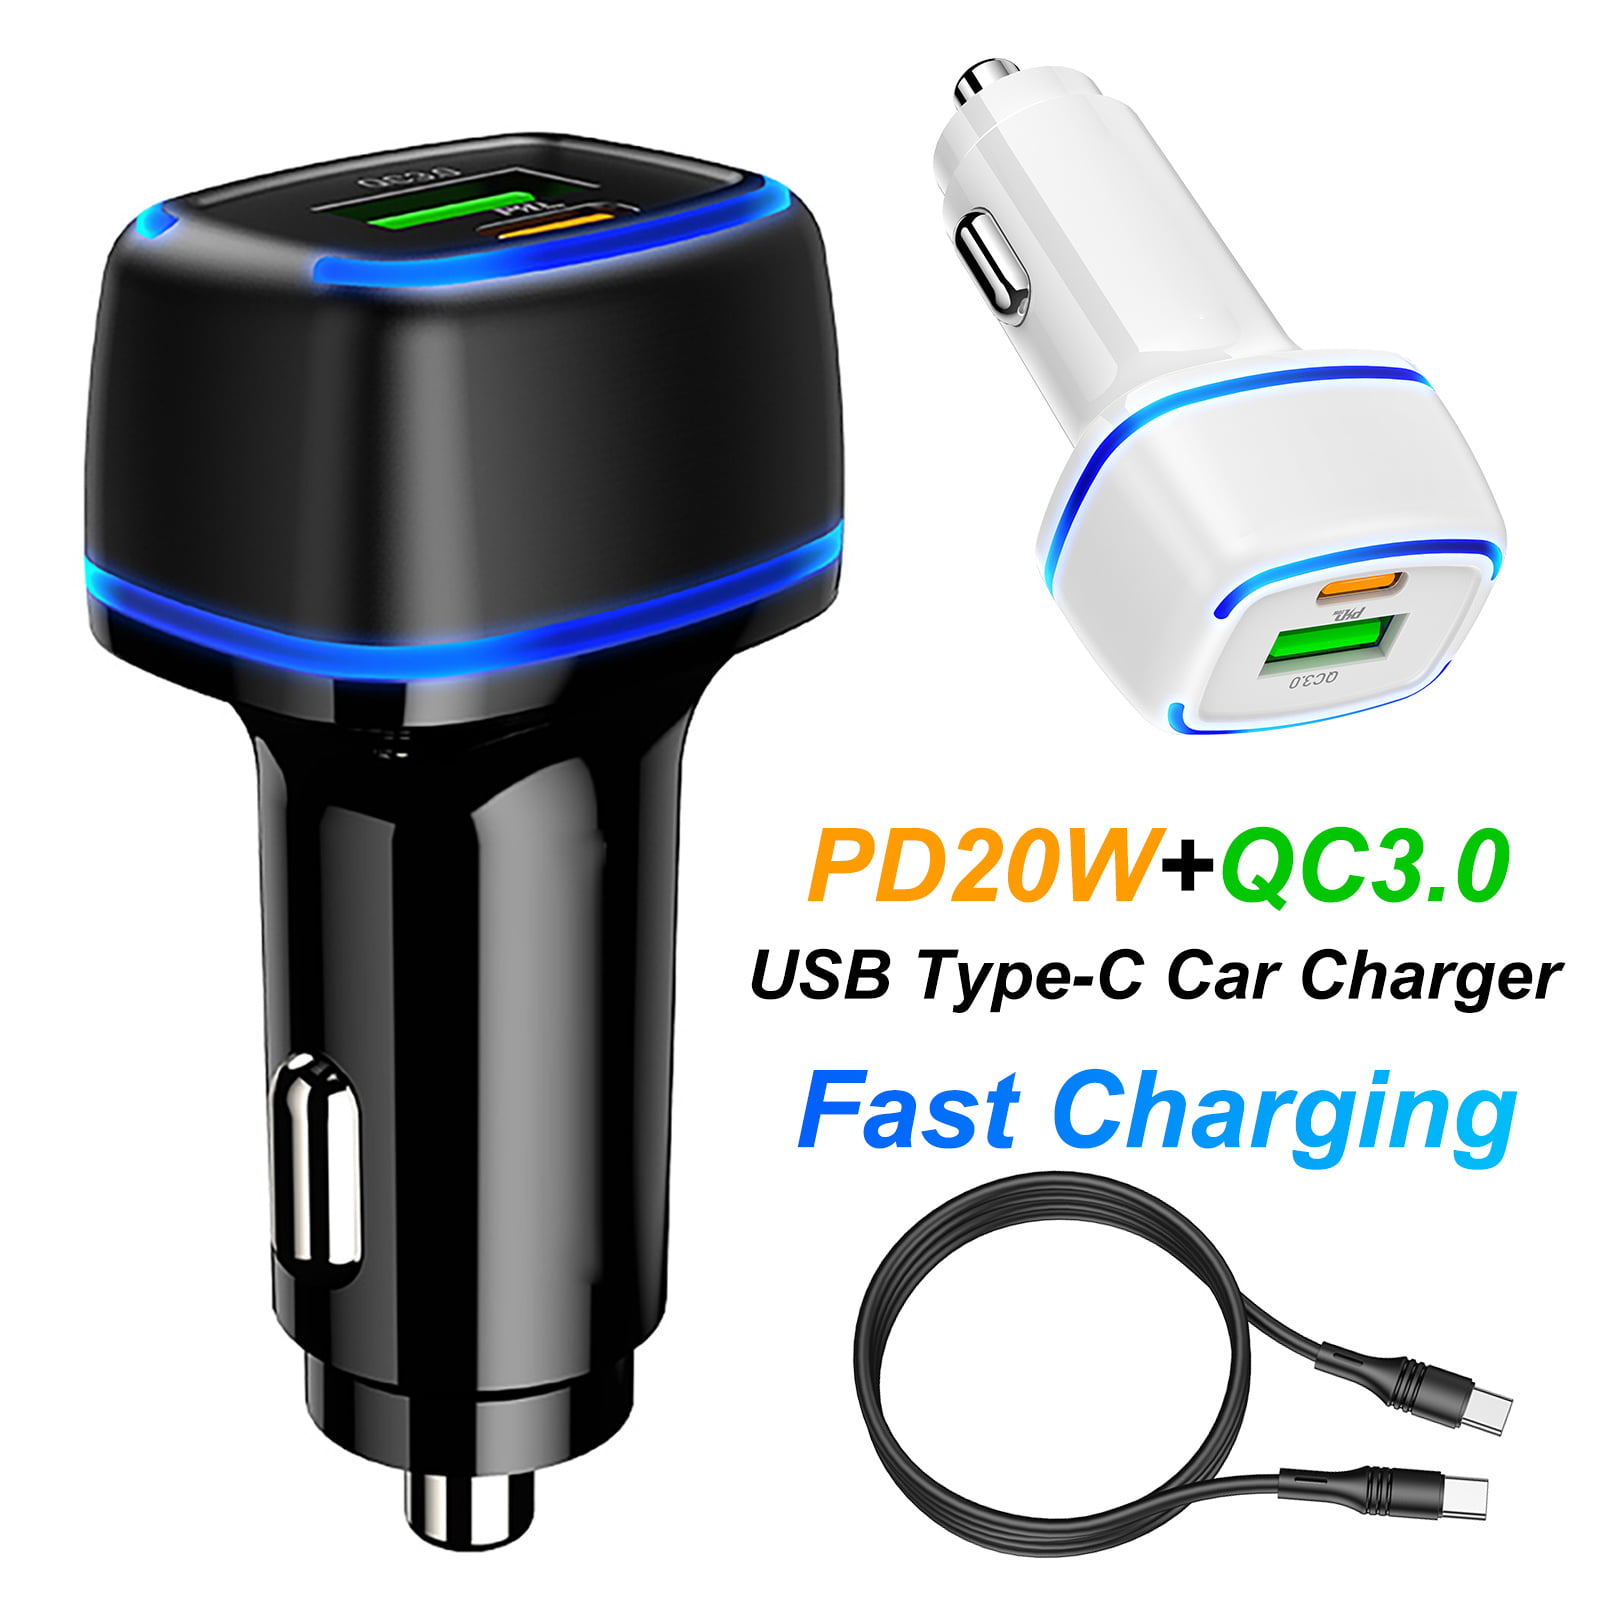 Fast Charge Dual USB Car Chargers Great Stocking Stuffer White 